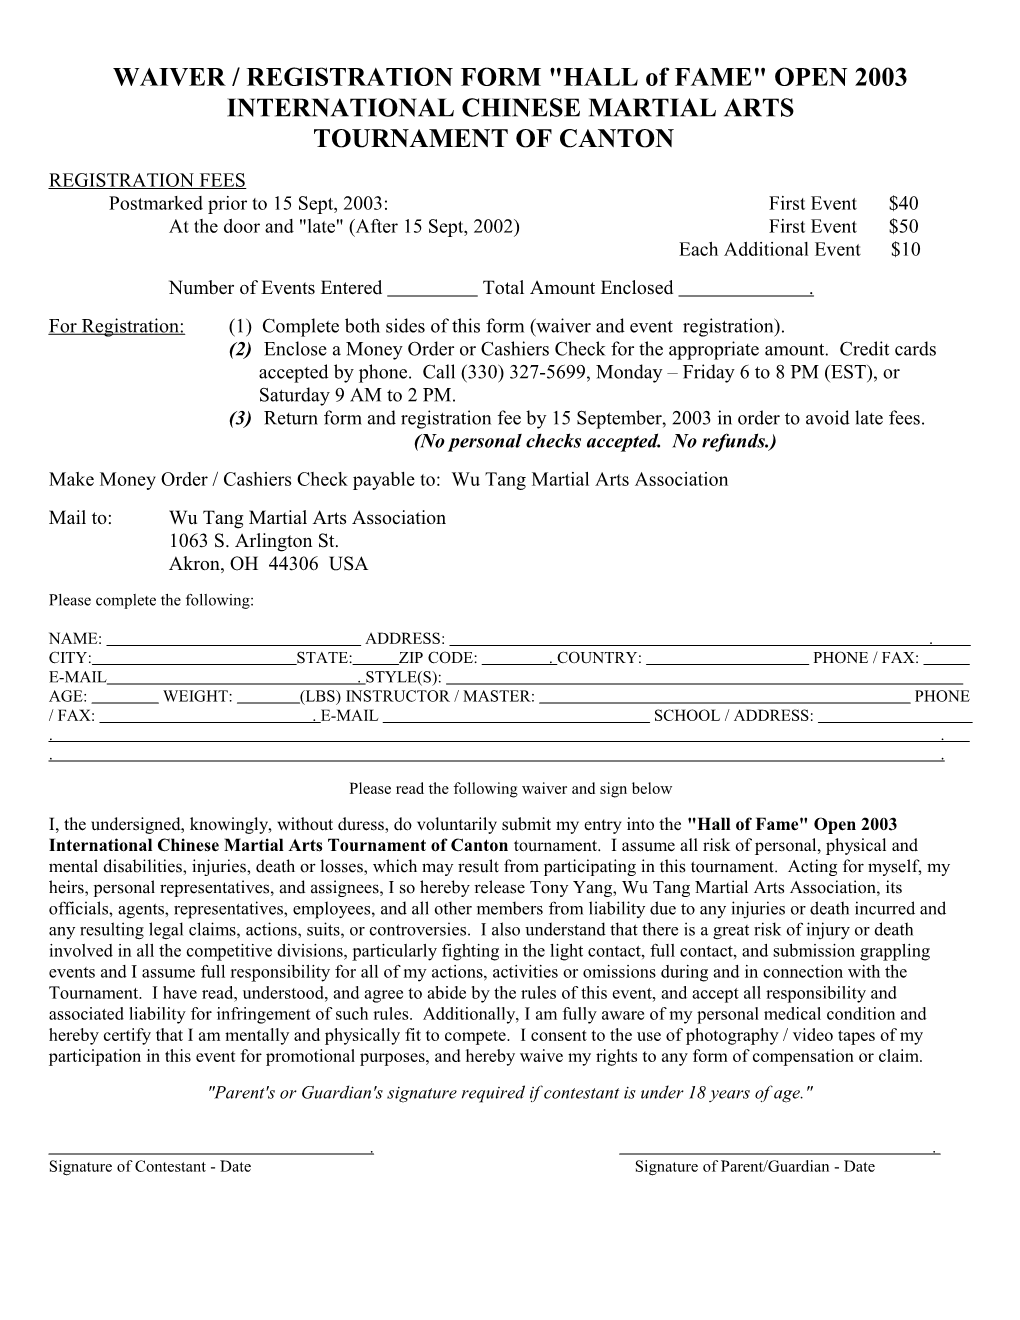 WAIVER / REGISTRATION FORM AHALL of FAME OPEN 2001